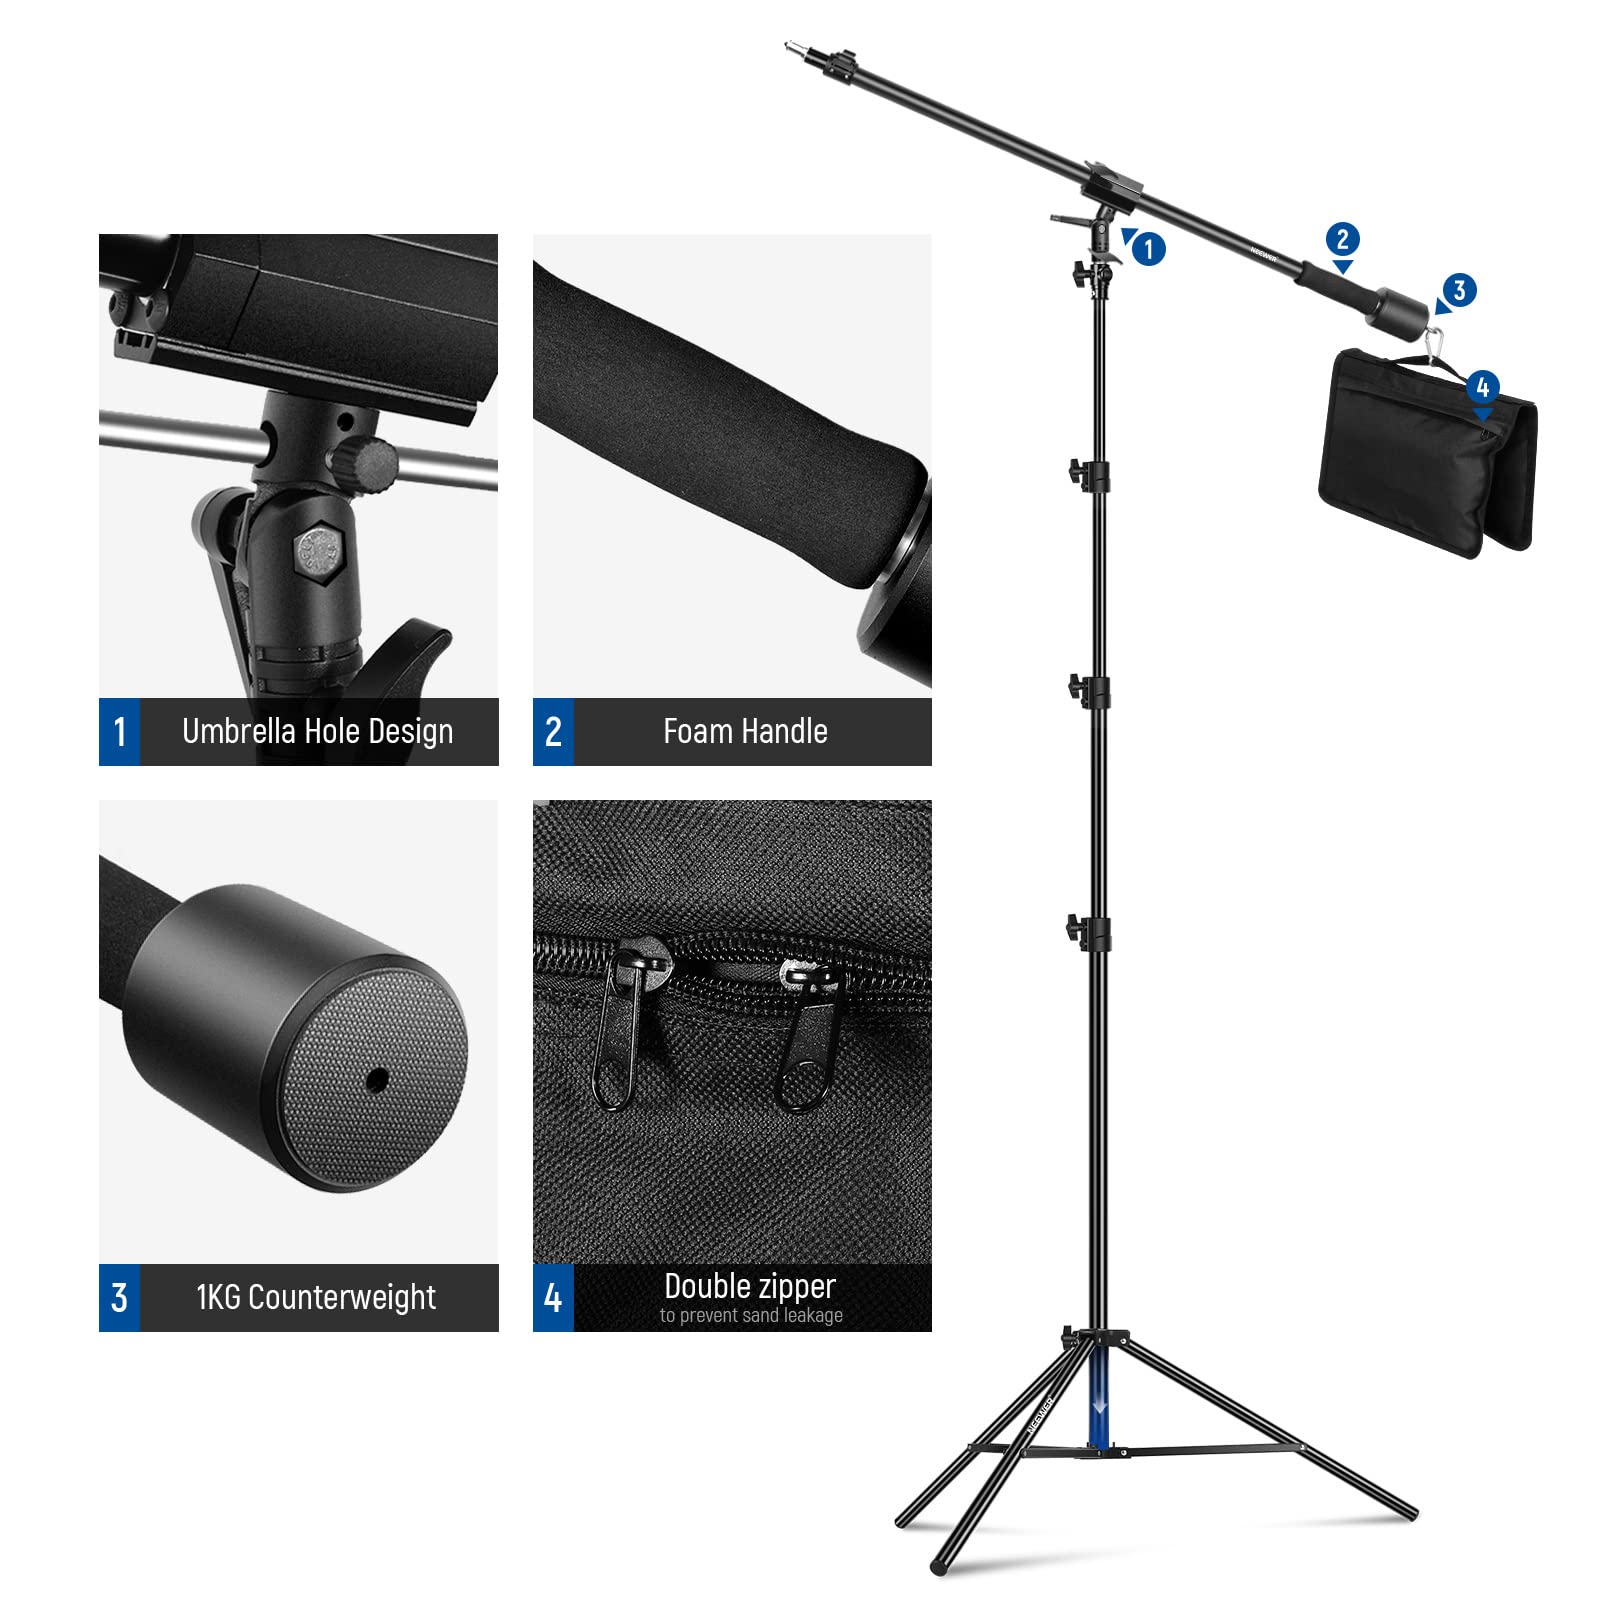 NEEWER Air Cushioned Aluminum Light Stand, 9.8ft/3m Adjustable Photography Stand with Boom Arm, Counterweight, Sandbag, 1/4" Screw for Softbox, Studio Flash, Umbrella, Ring Light, Max Load 5kg